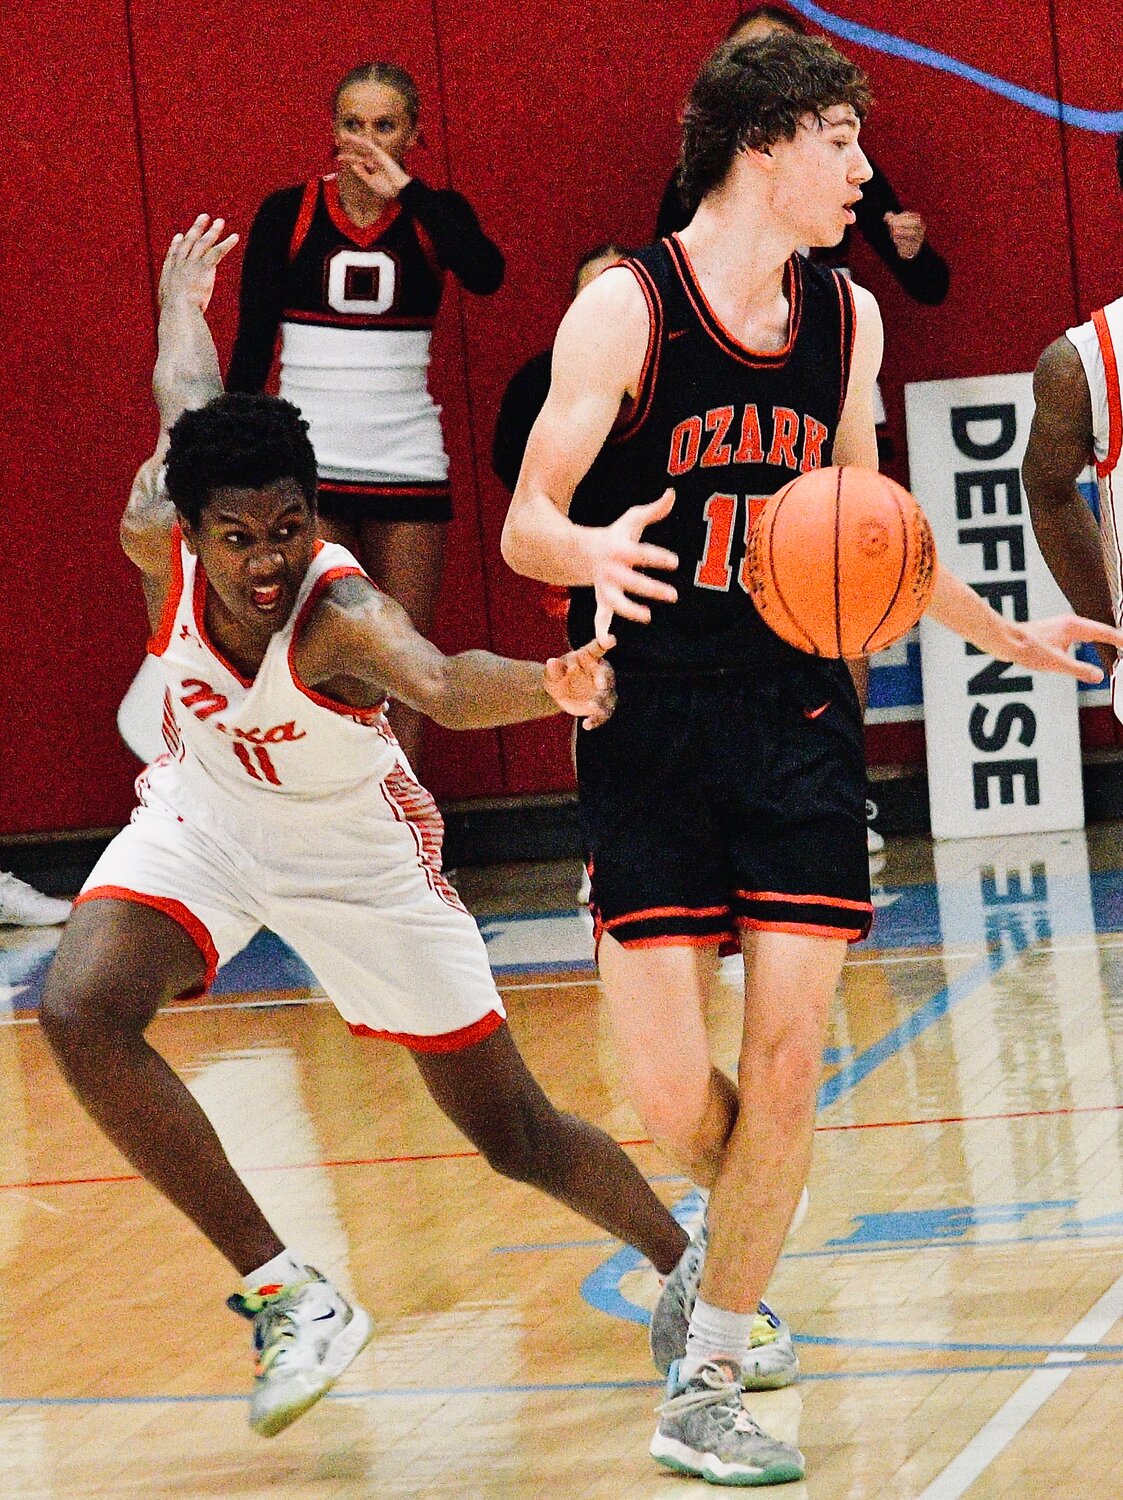 NIXA'S JAISE COMBS goes for a steal against Ozark's Hudson Roberts.